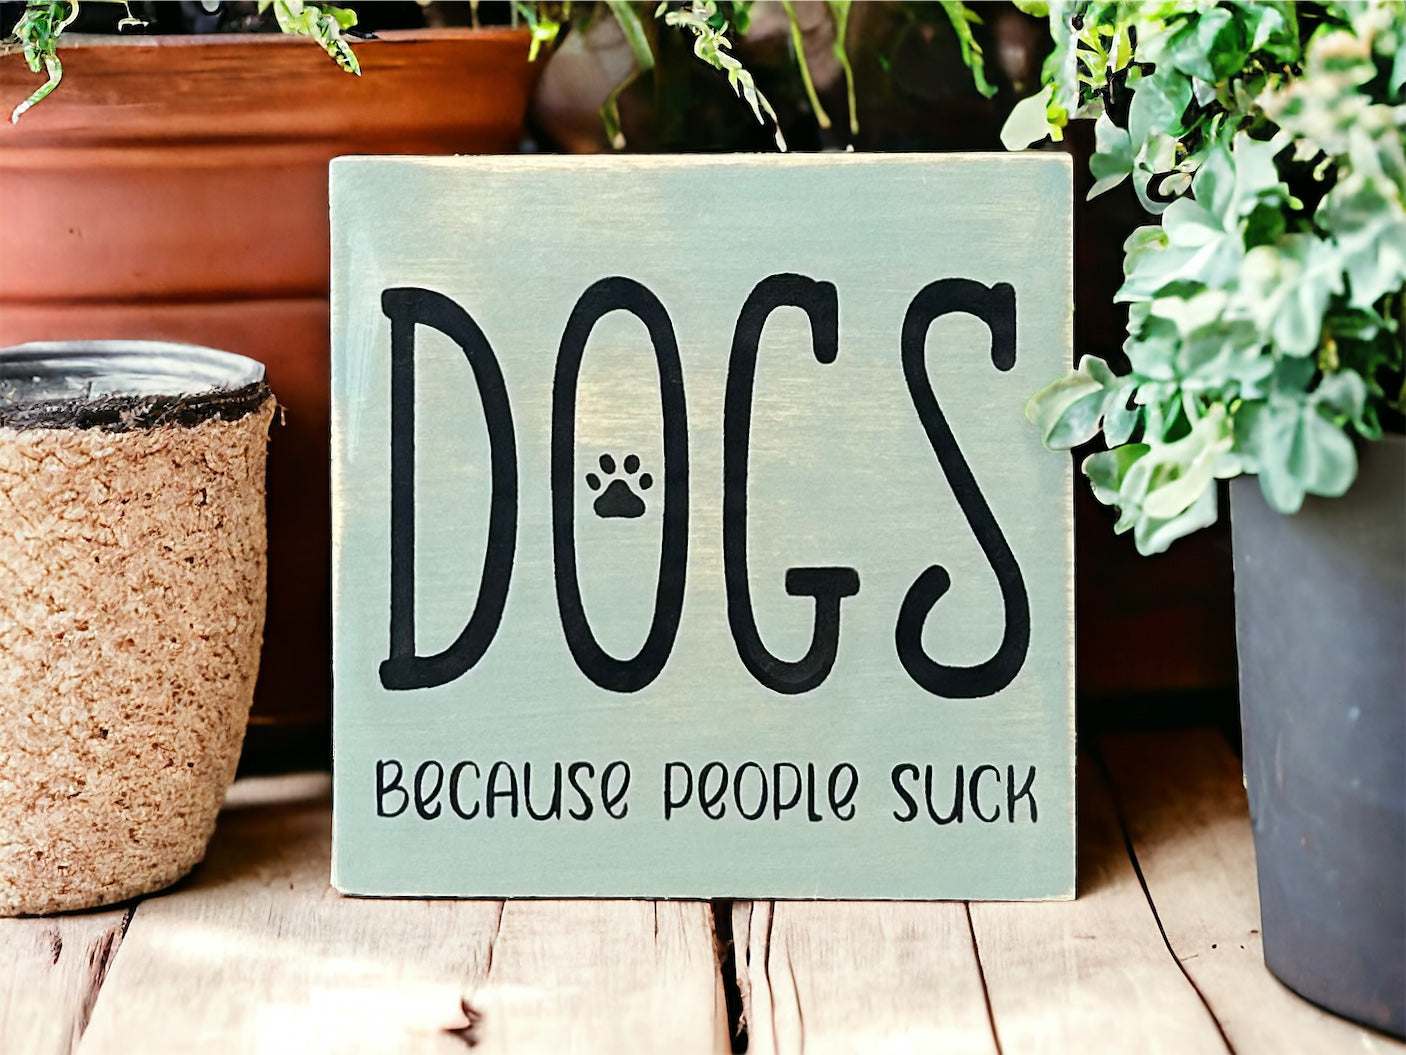 "Dogs" Wood sign